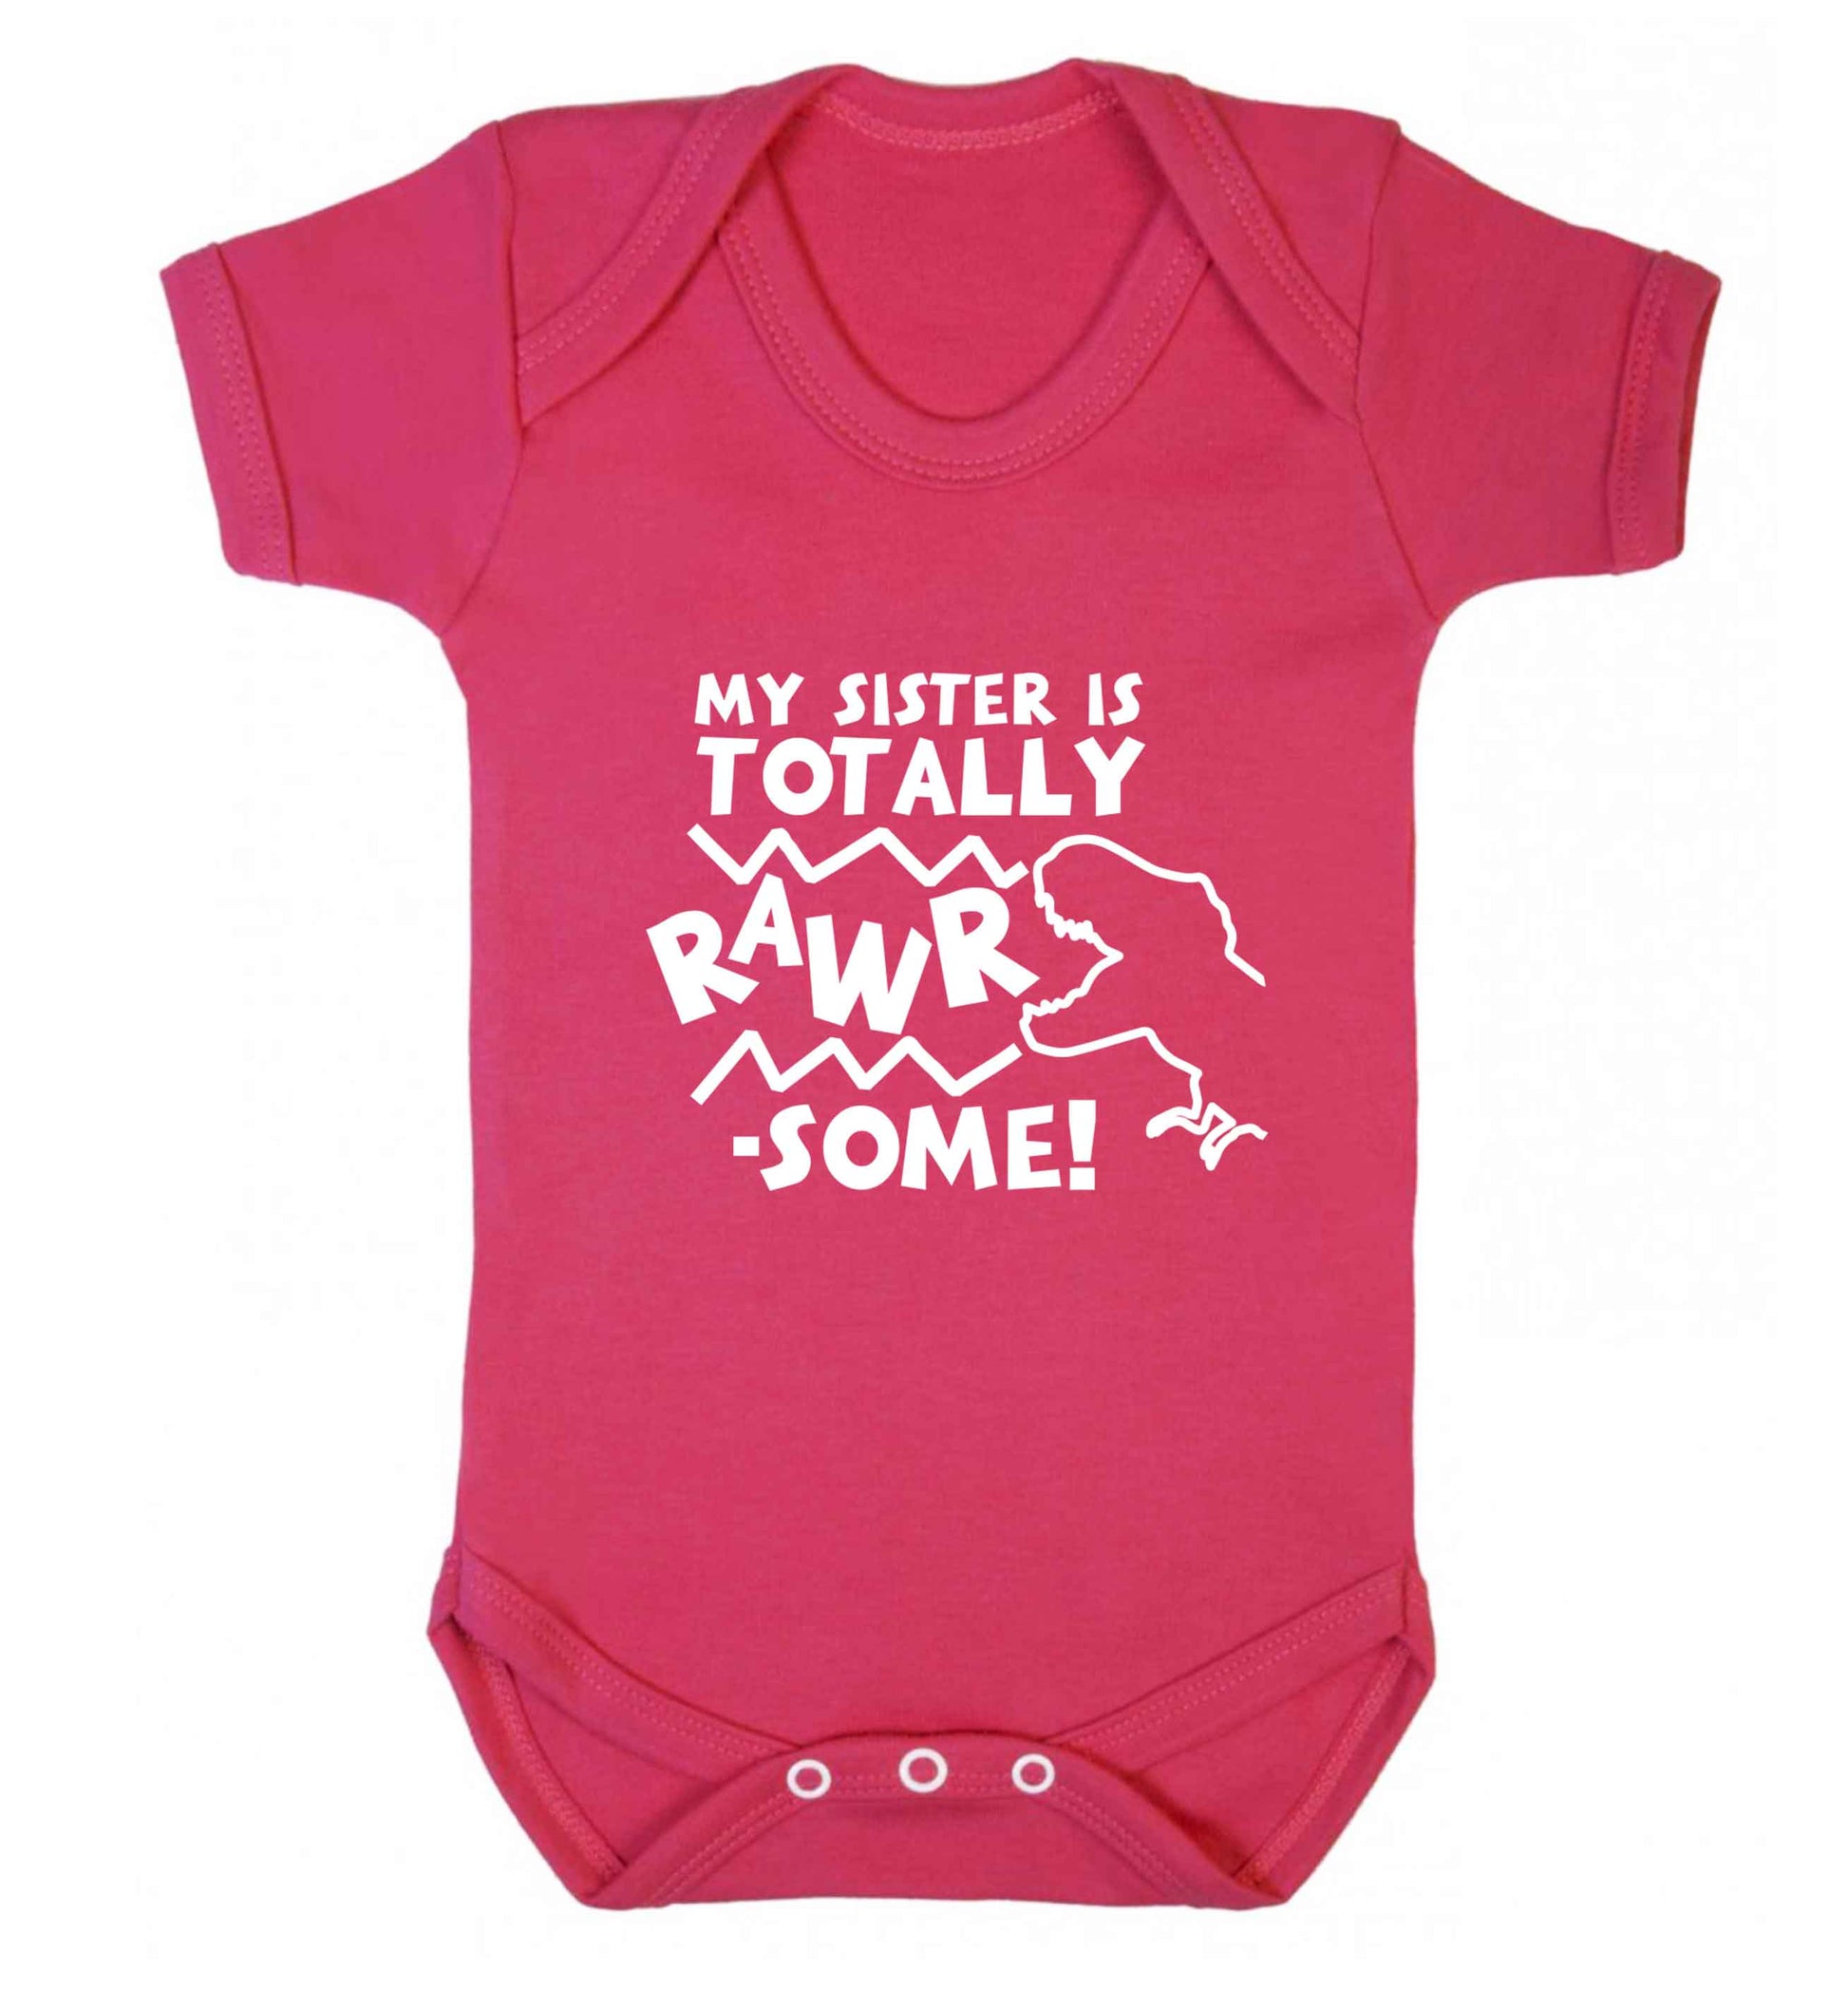 My sister is totally rawrsome baby vest dark pink 18-24 months